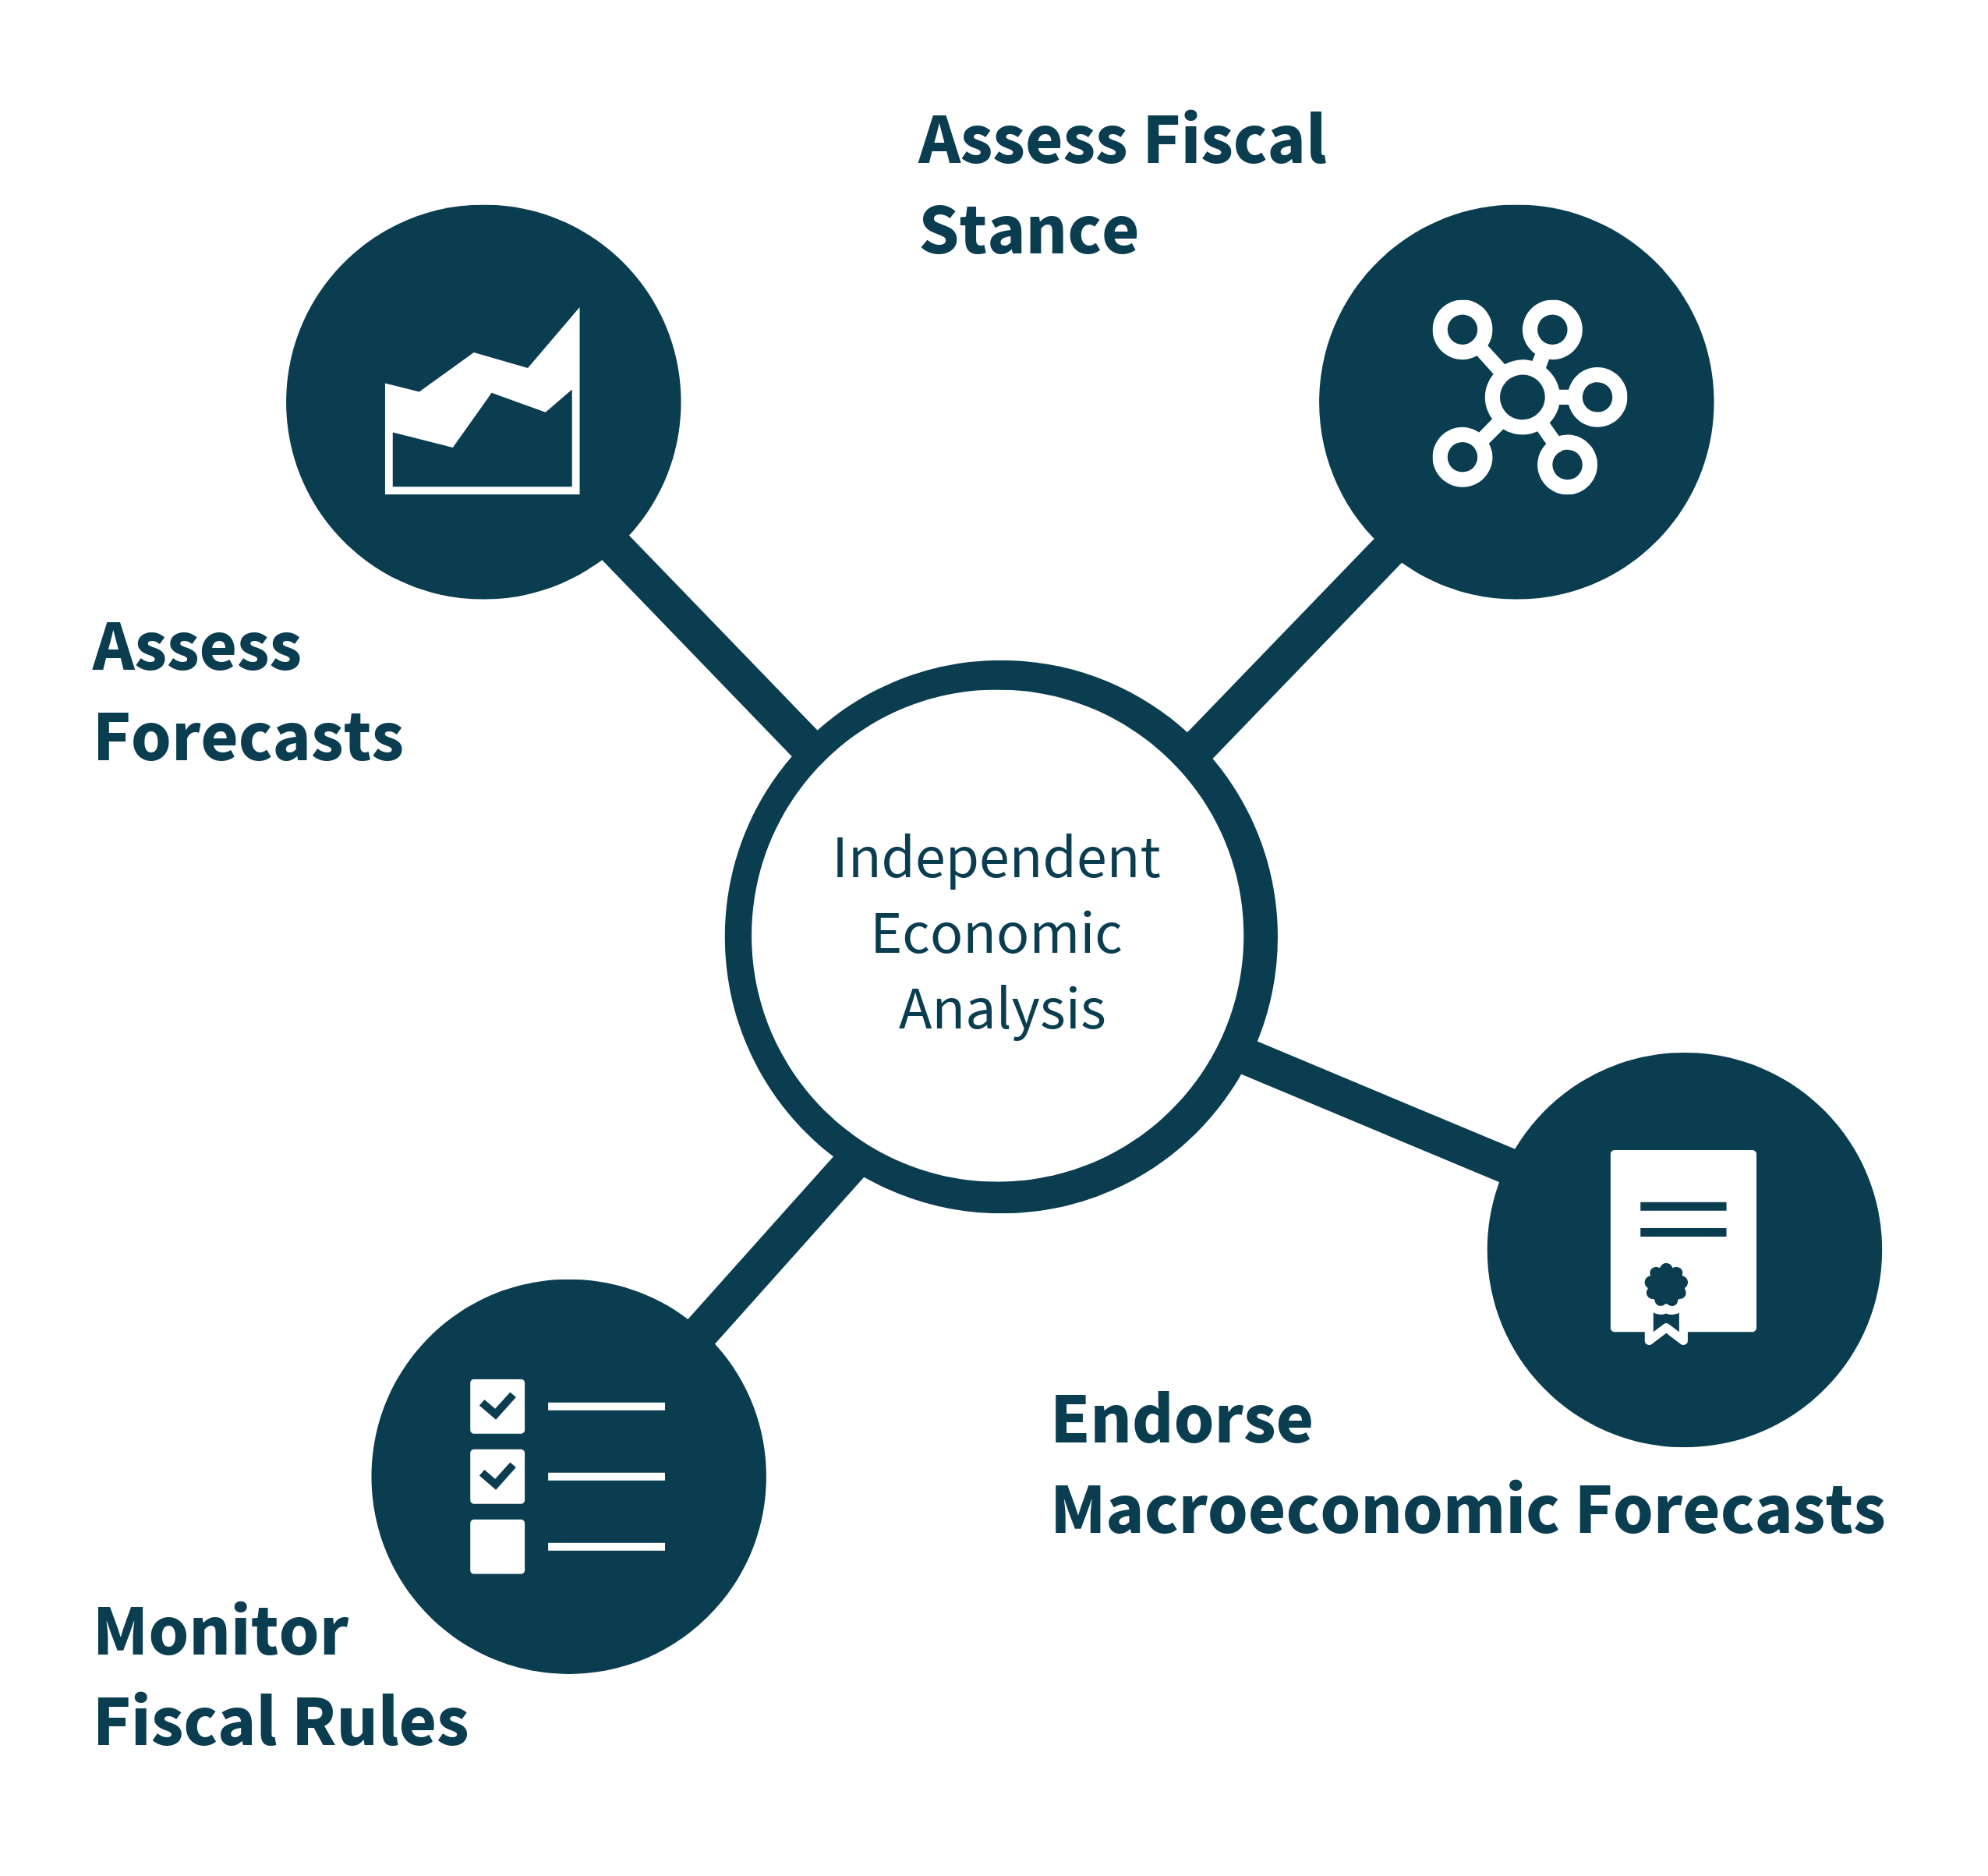 Independent Economic Analysis: Assess official forecasts; Endorse macroeconomic forecasts; Assess compliance with rules; Assess fiscal stance